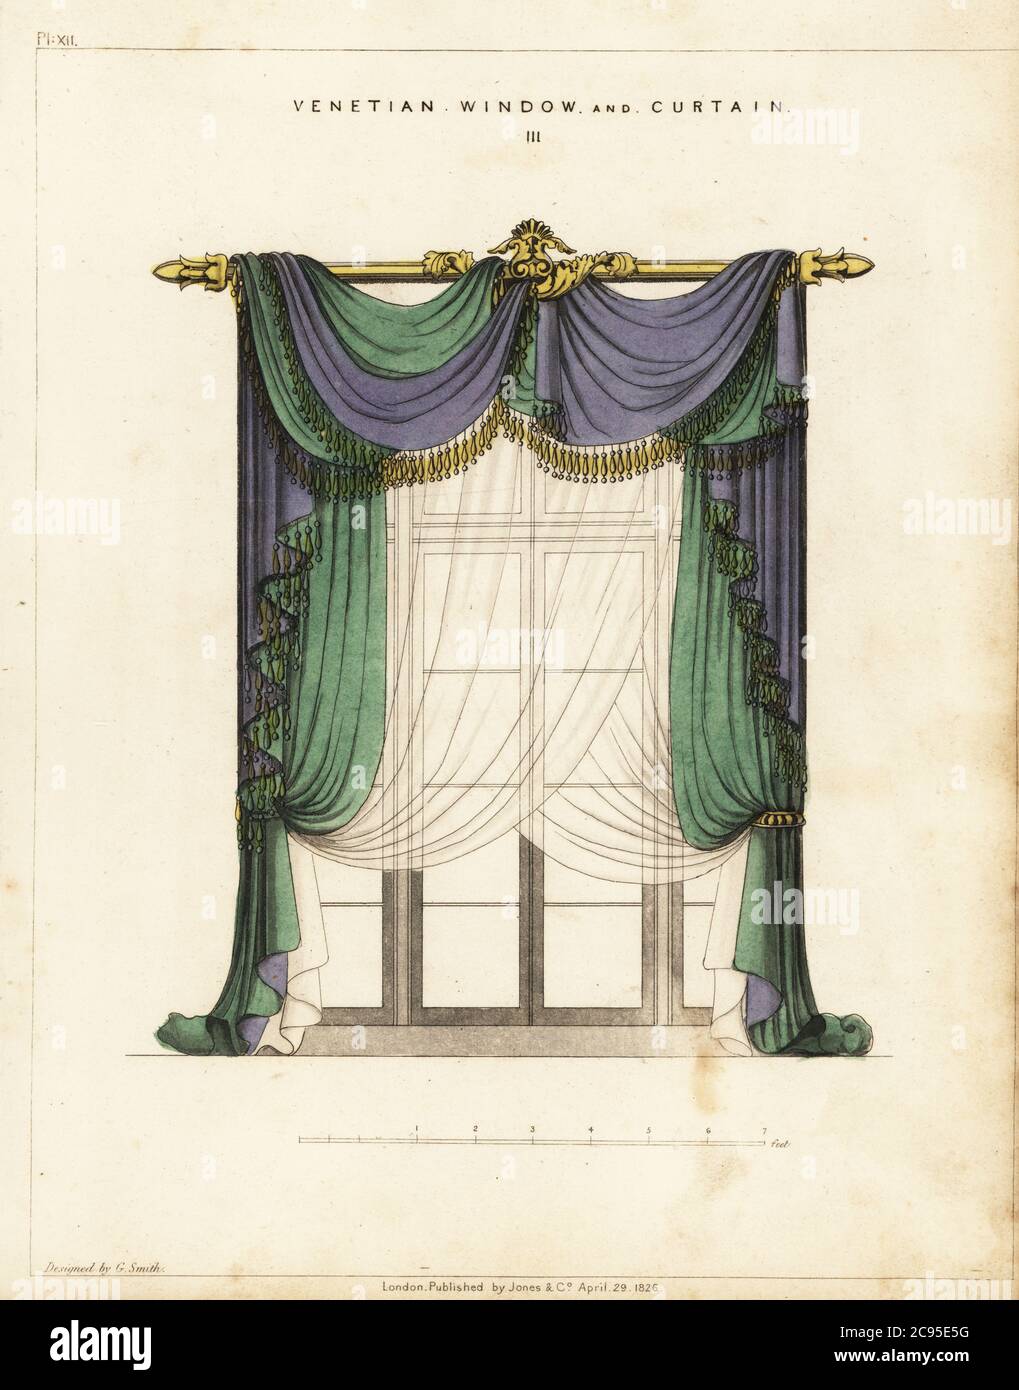 Venetian window and curtain, Regency style. Blue and green fringed curtains hanging from a gilt curtain rod with transparent curtains over the window. Handcoloured copperplate engraving from George Smith’s The Cabinet-Maker and Upholsterer’s Guide, Jones and Co., London, 1828. George Smith was upholsterer and furniture draughtsman to his Majesty (the Prince of Wales, later King George IV), circa 1786-1826. Stock Photo